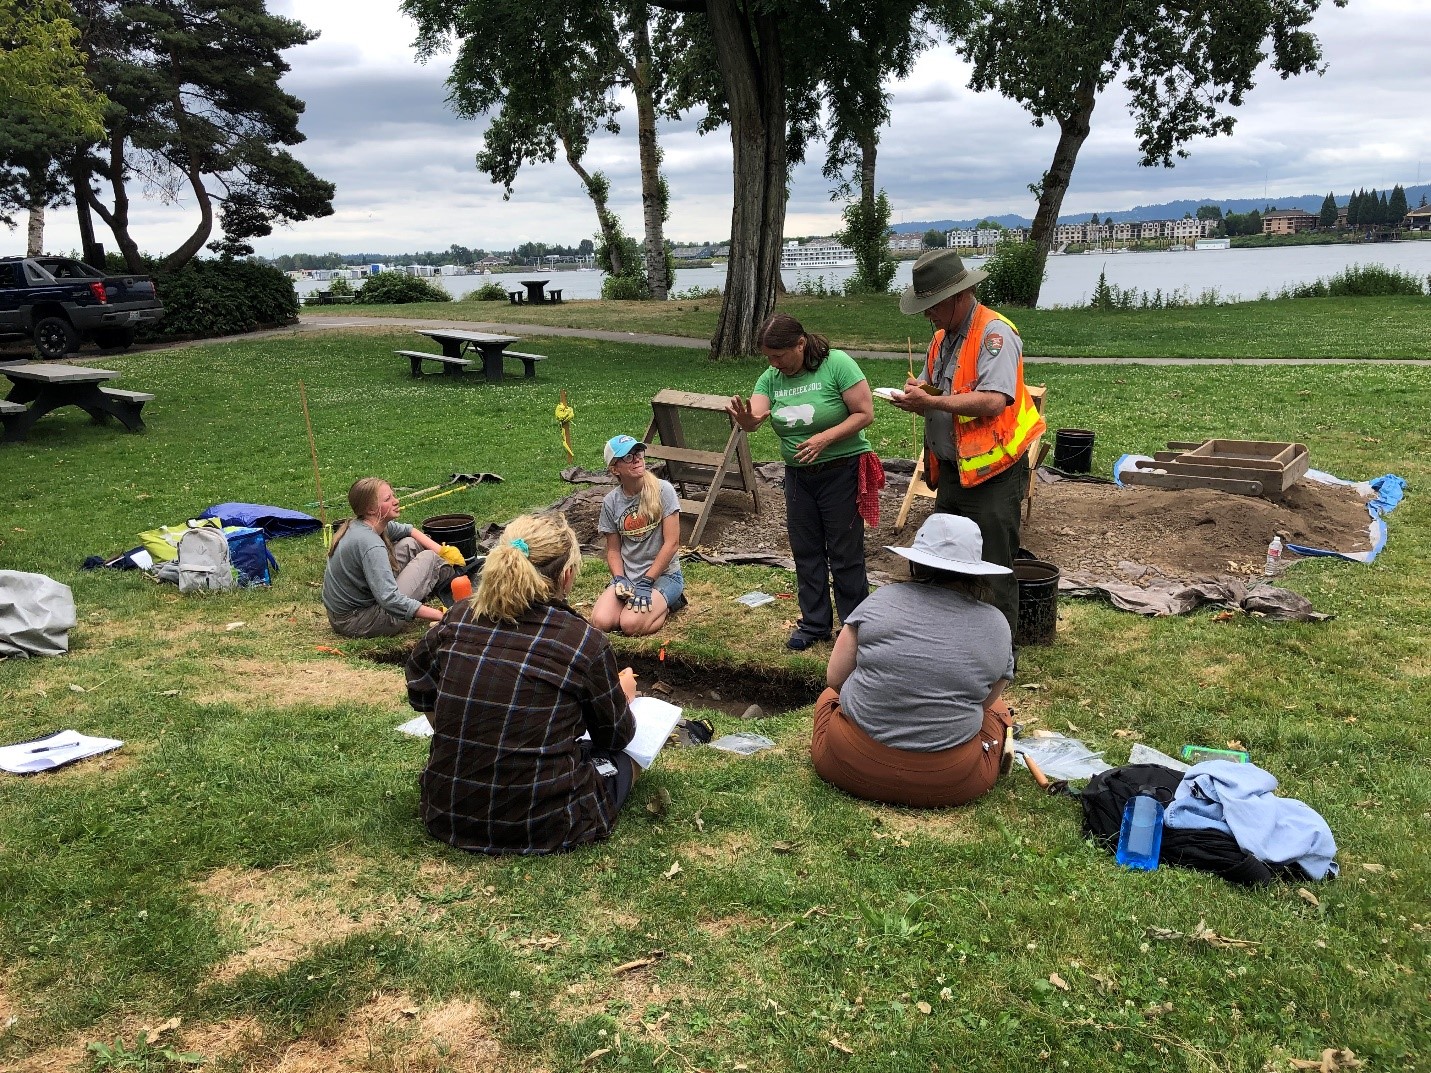 A group of people working on an archaeological excavation in a grassy area by the Columbia River waterfront.